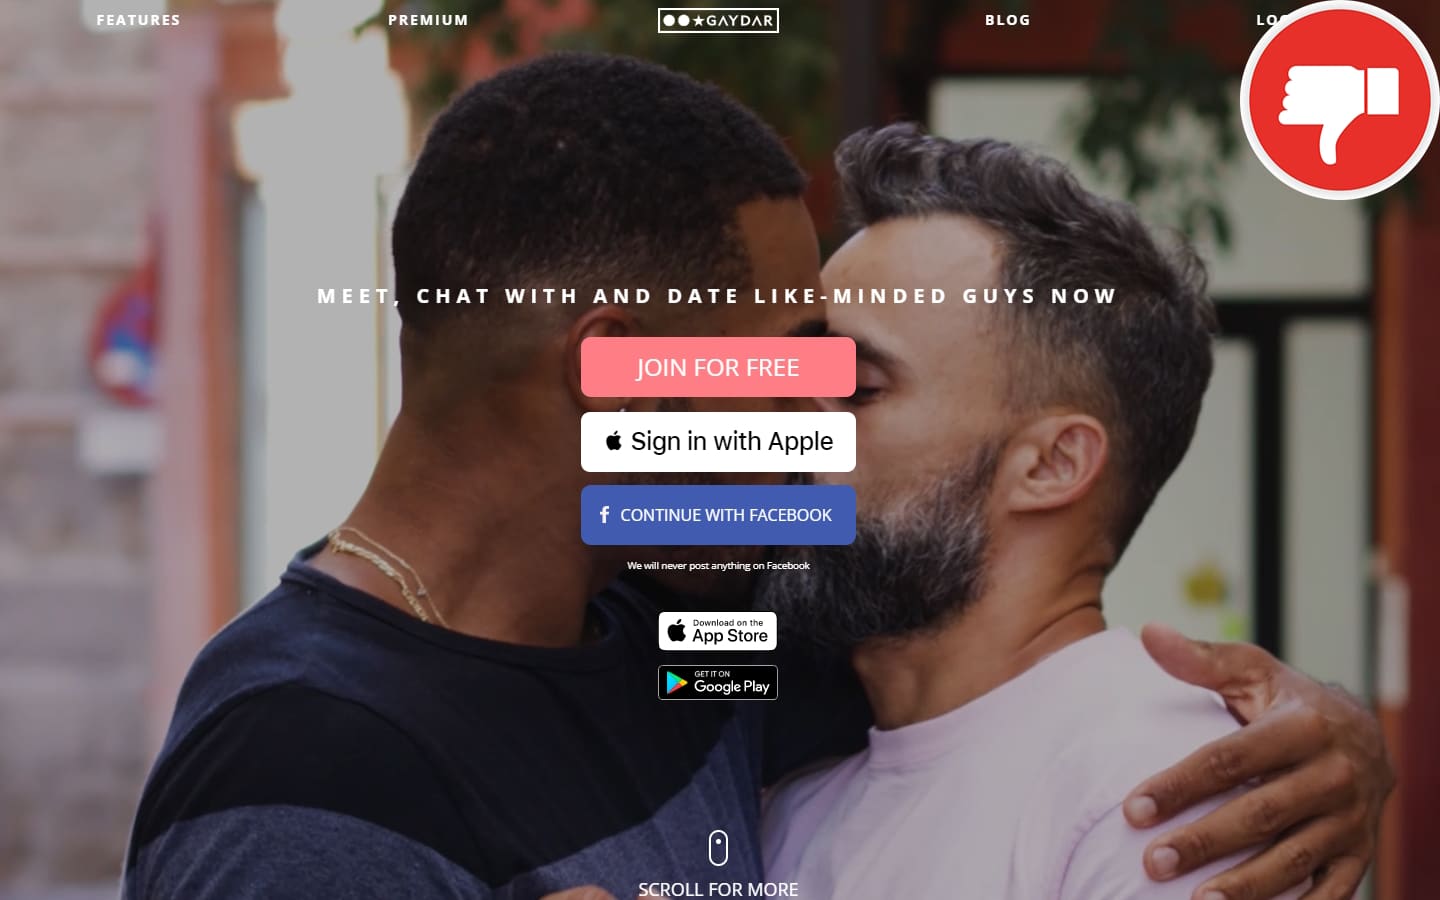 Review Gaydar.net scam experience